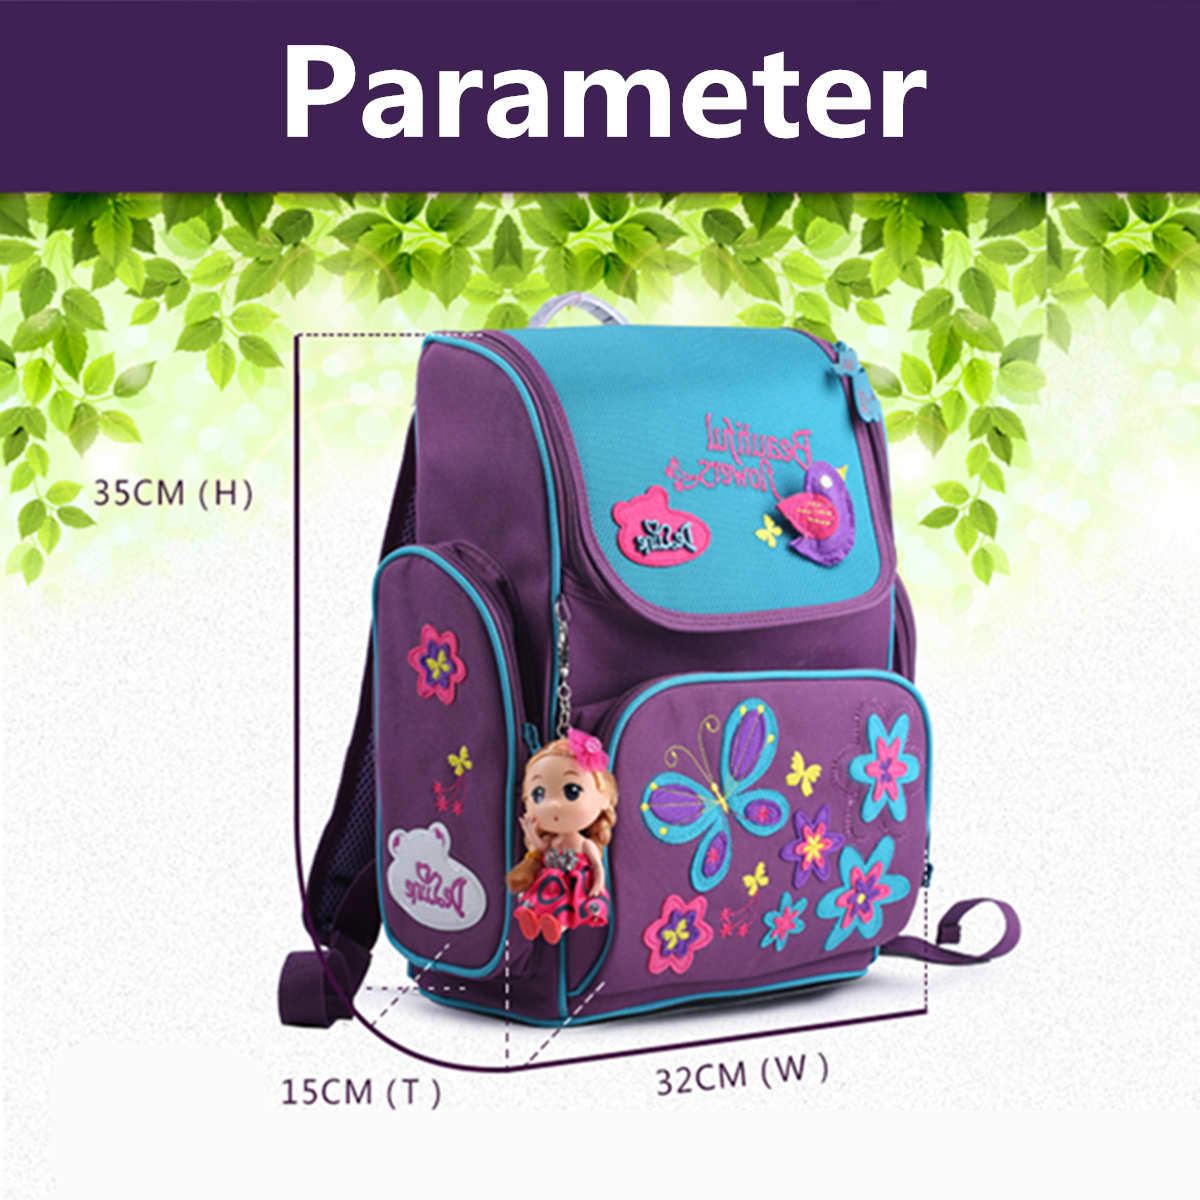 18L-Girls-Kids-Cartoon-School-Bag-Reflective-Safety-Waterproof-Children-Backpack-With-Doll-Pendant-1352202-2